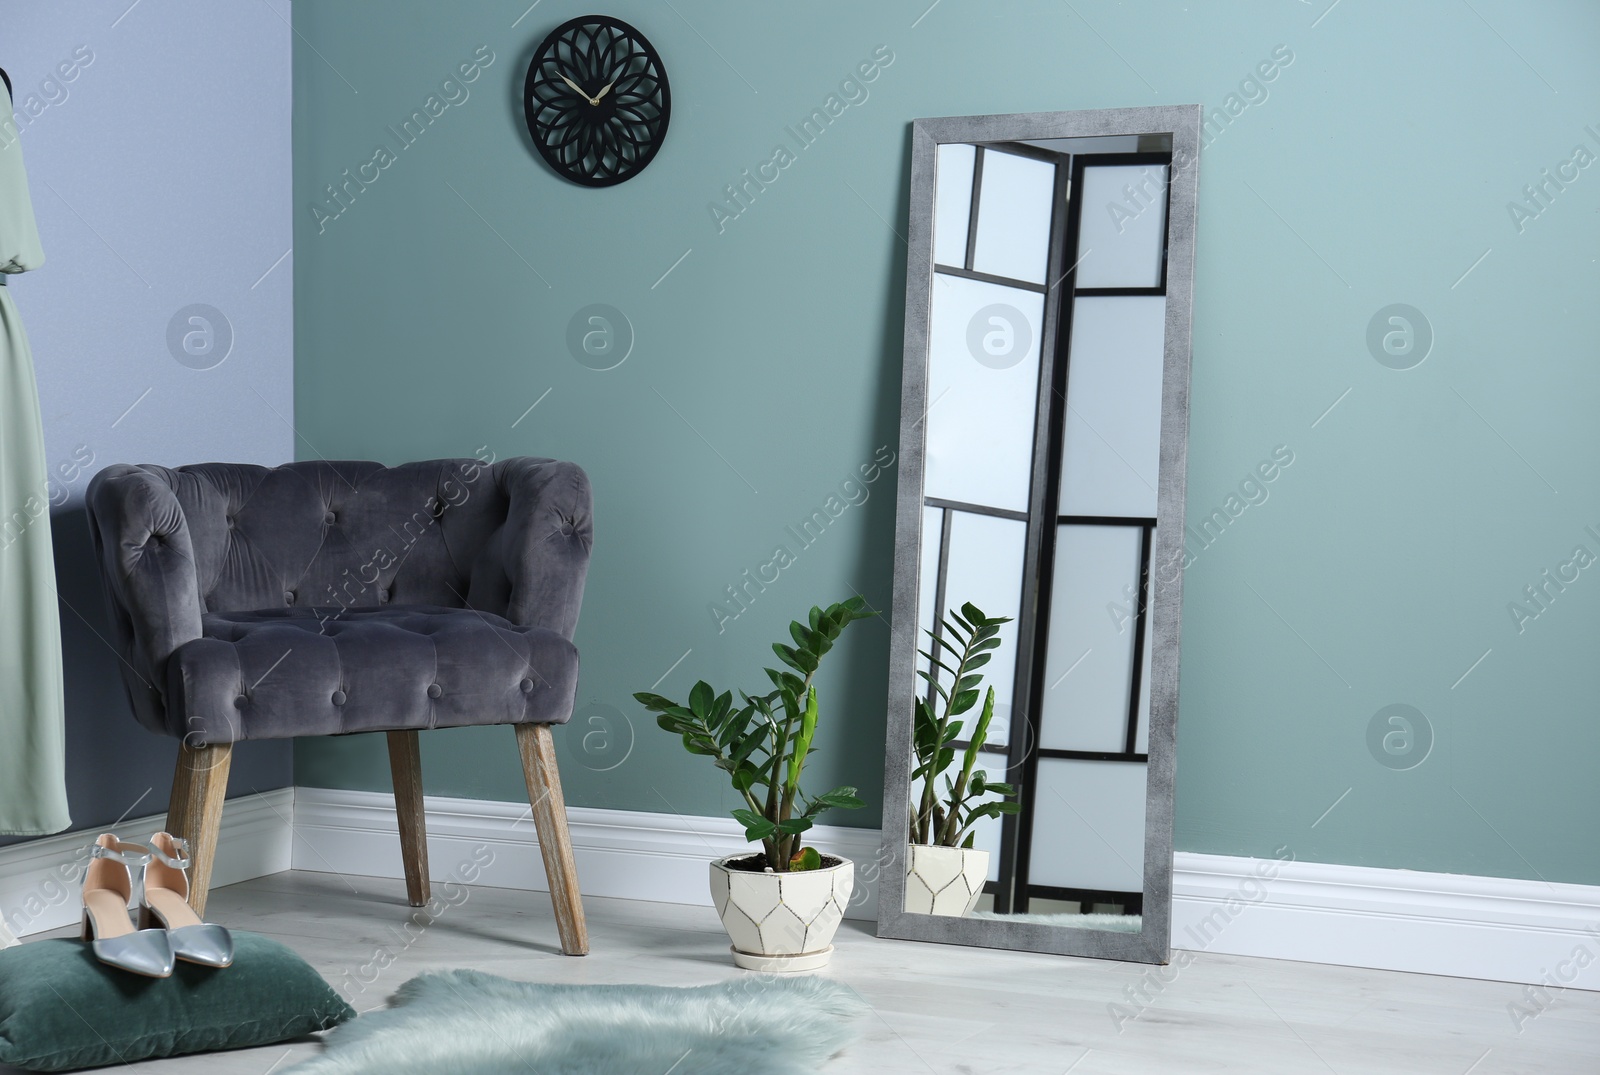 Photo of Elegant room interior with large mirror and comfortable armchair